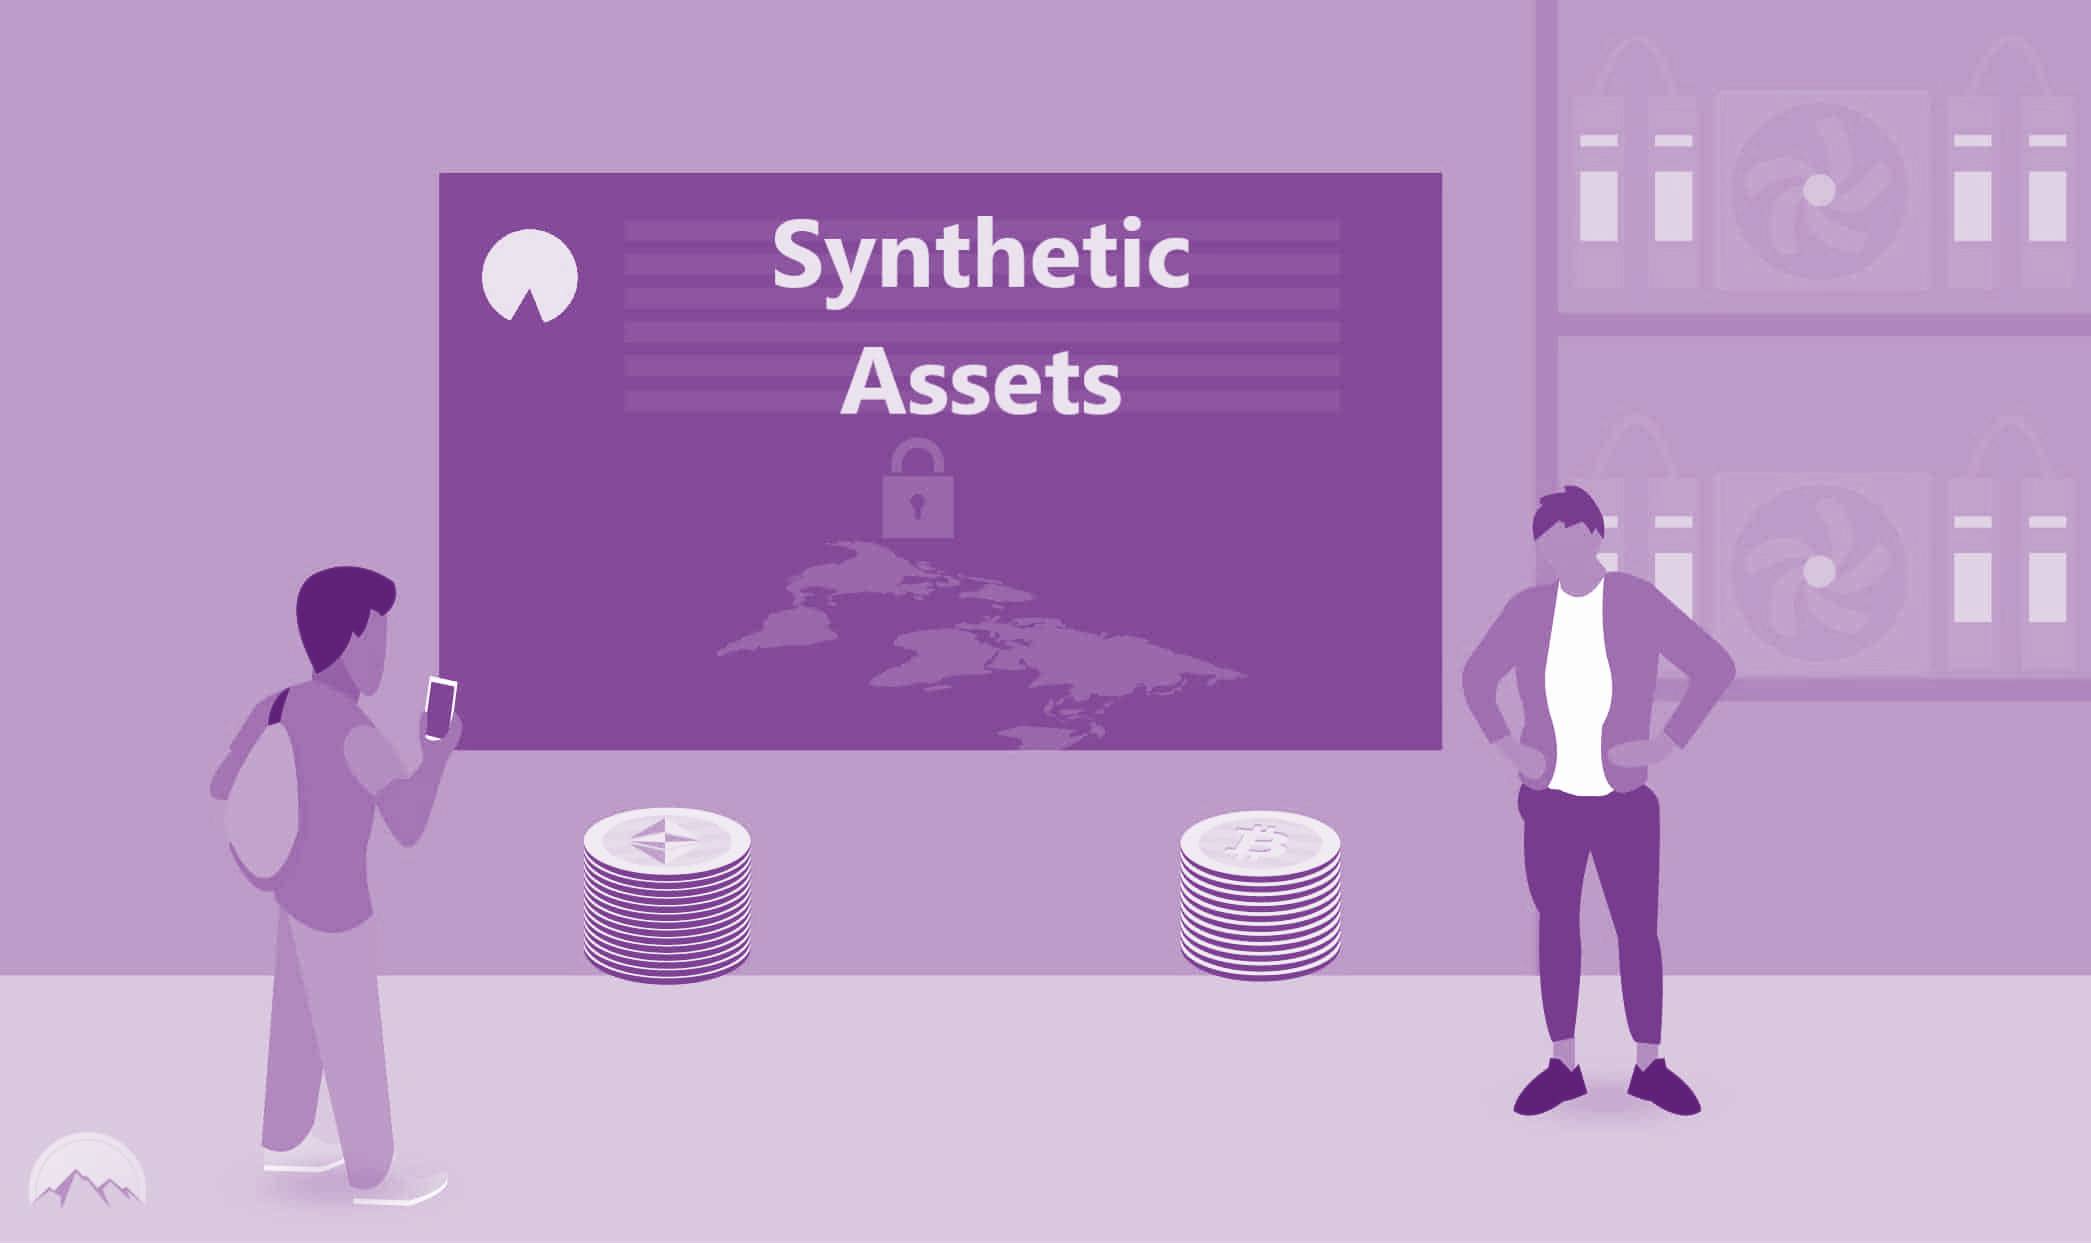 Nguồn: https://www.forex.academy/crypto-synthetic-assets-explained/